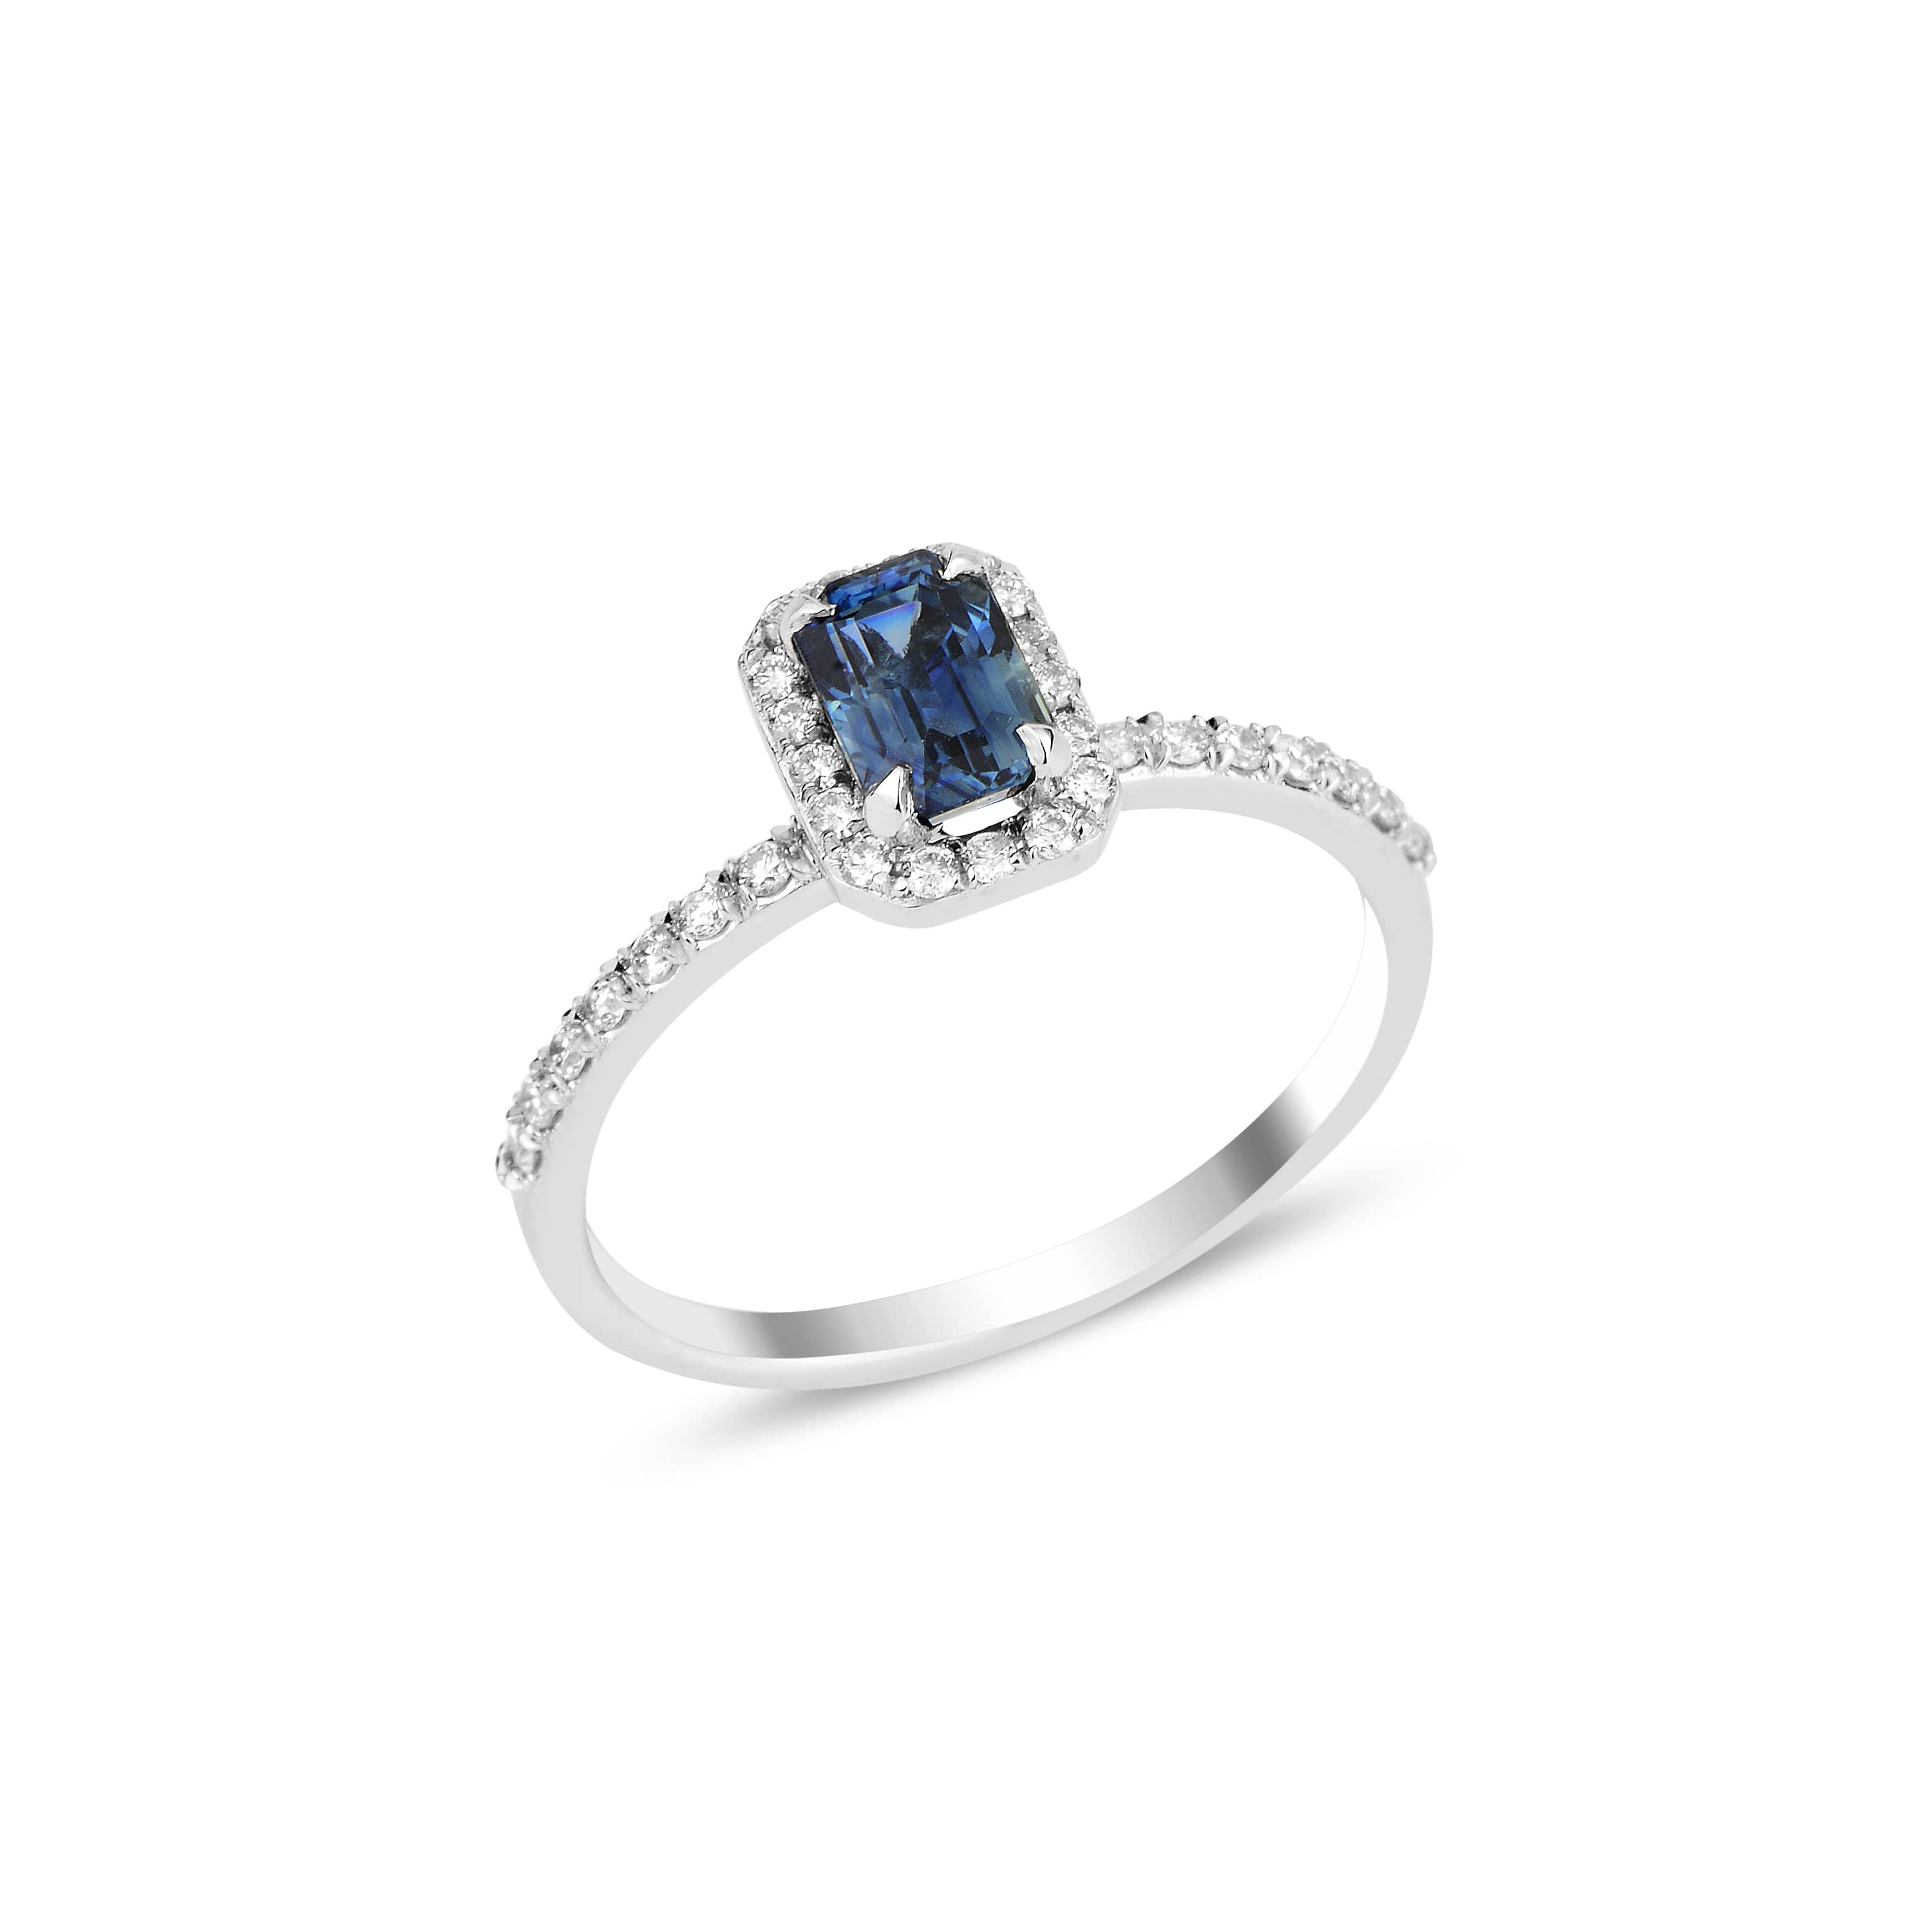 Teal Sapphire And Diamond 1.07ct Ring